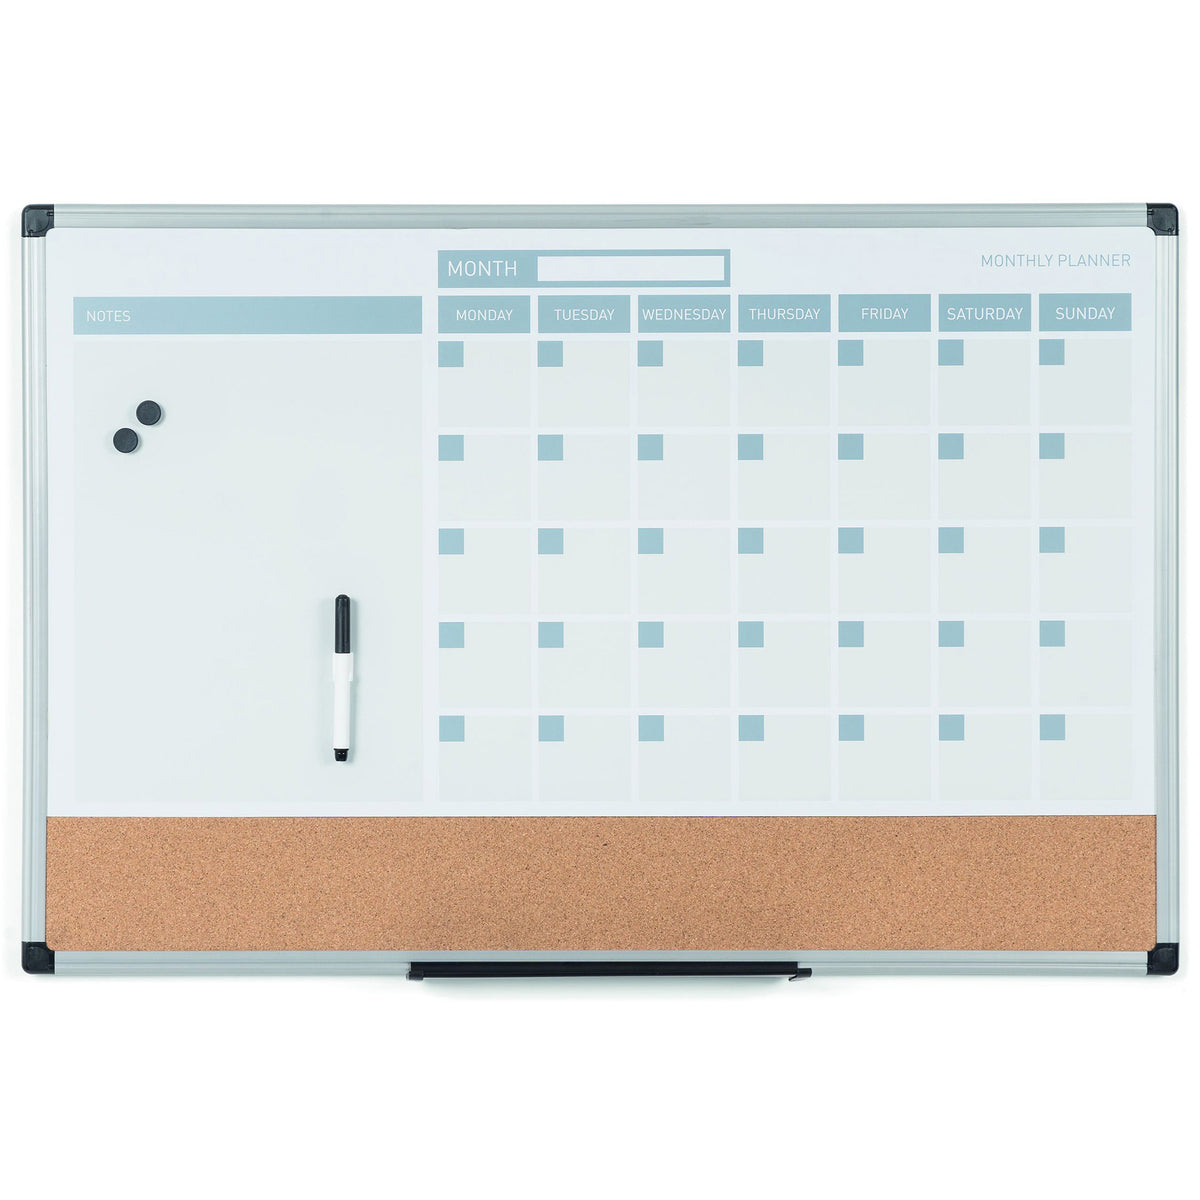 MB0707186P Magnetic Dry Erase Monthly Calendar Planner Push Pin Corkboard Combo with Marker Tray, 24" x 36", Gray Plastic Frame by MasterVision